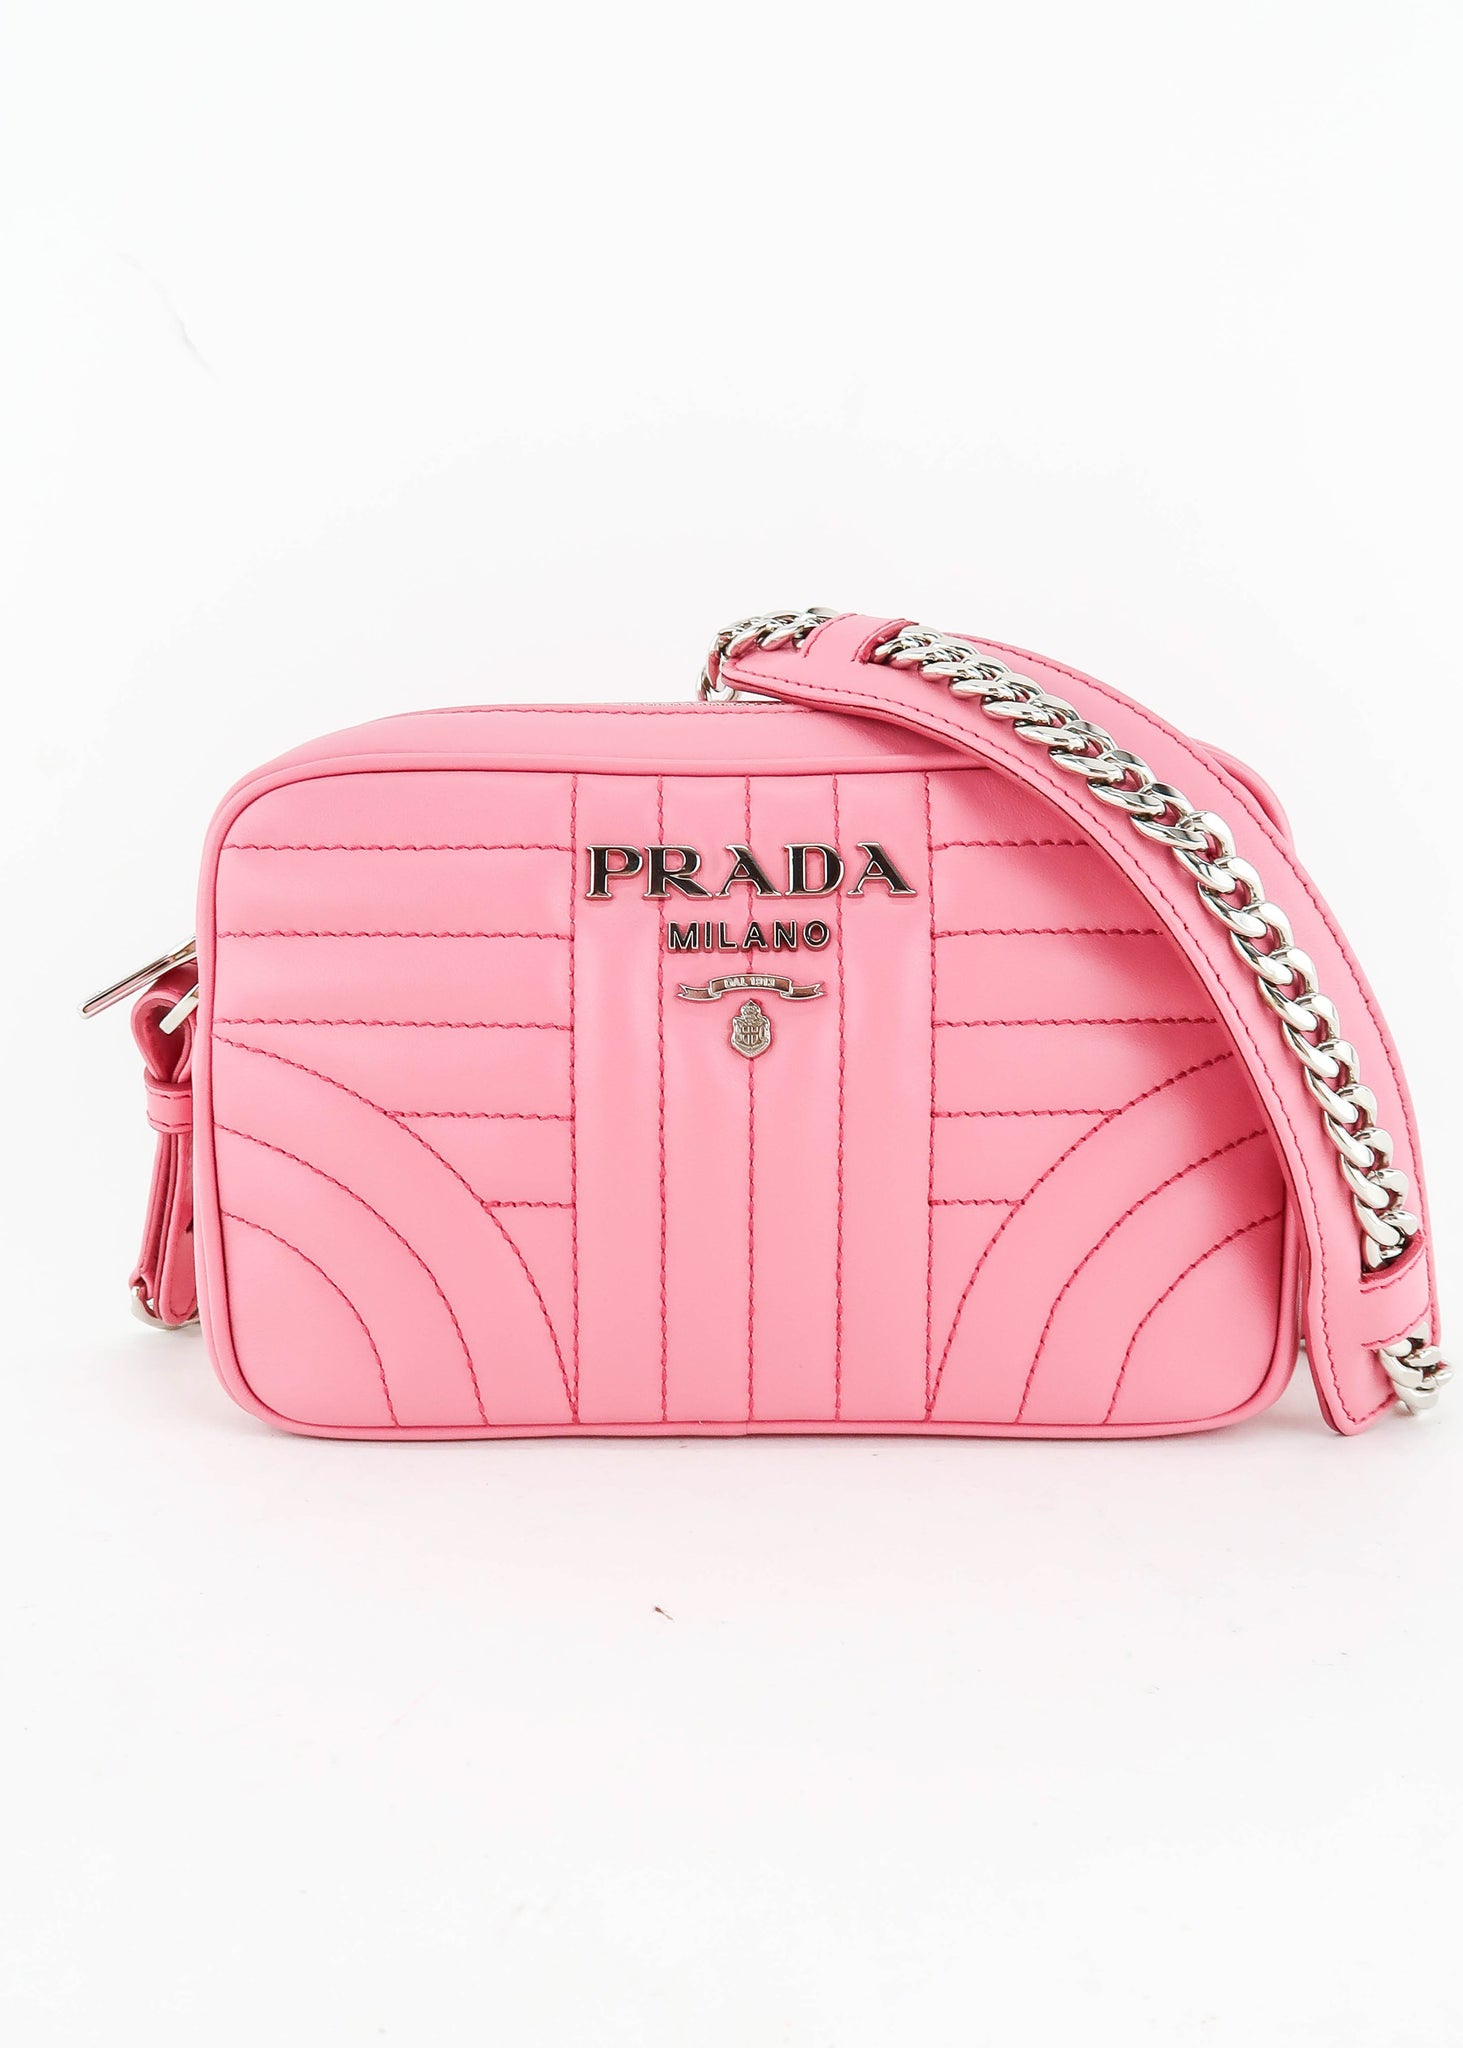 PRADA Shoulder Bags for Women with Chain Strap, Authenticity Guaranteed